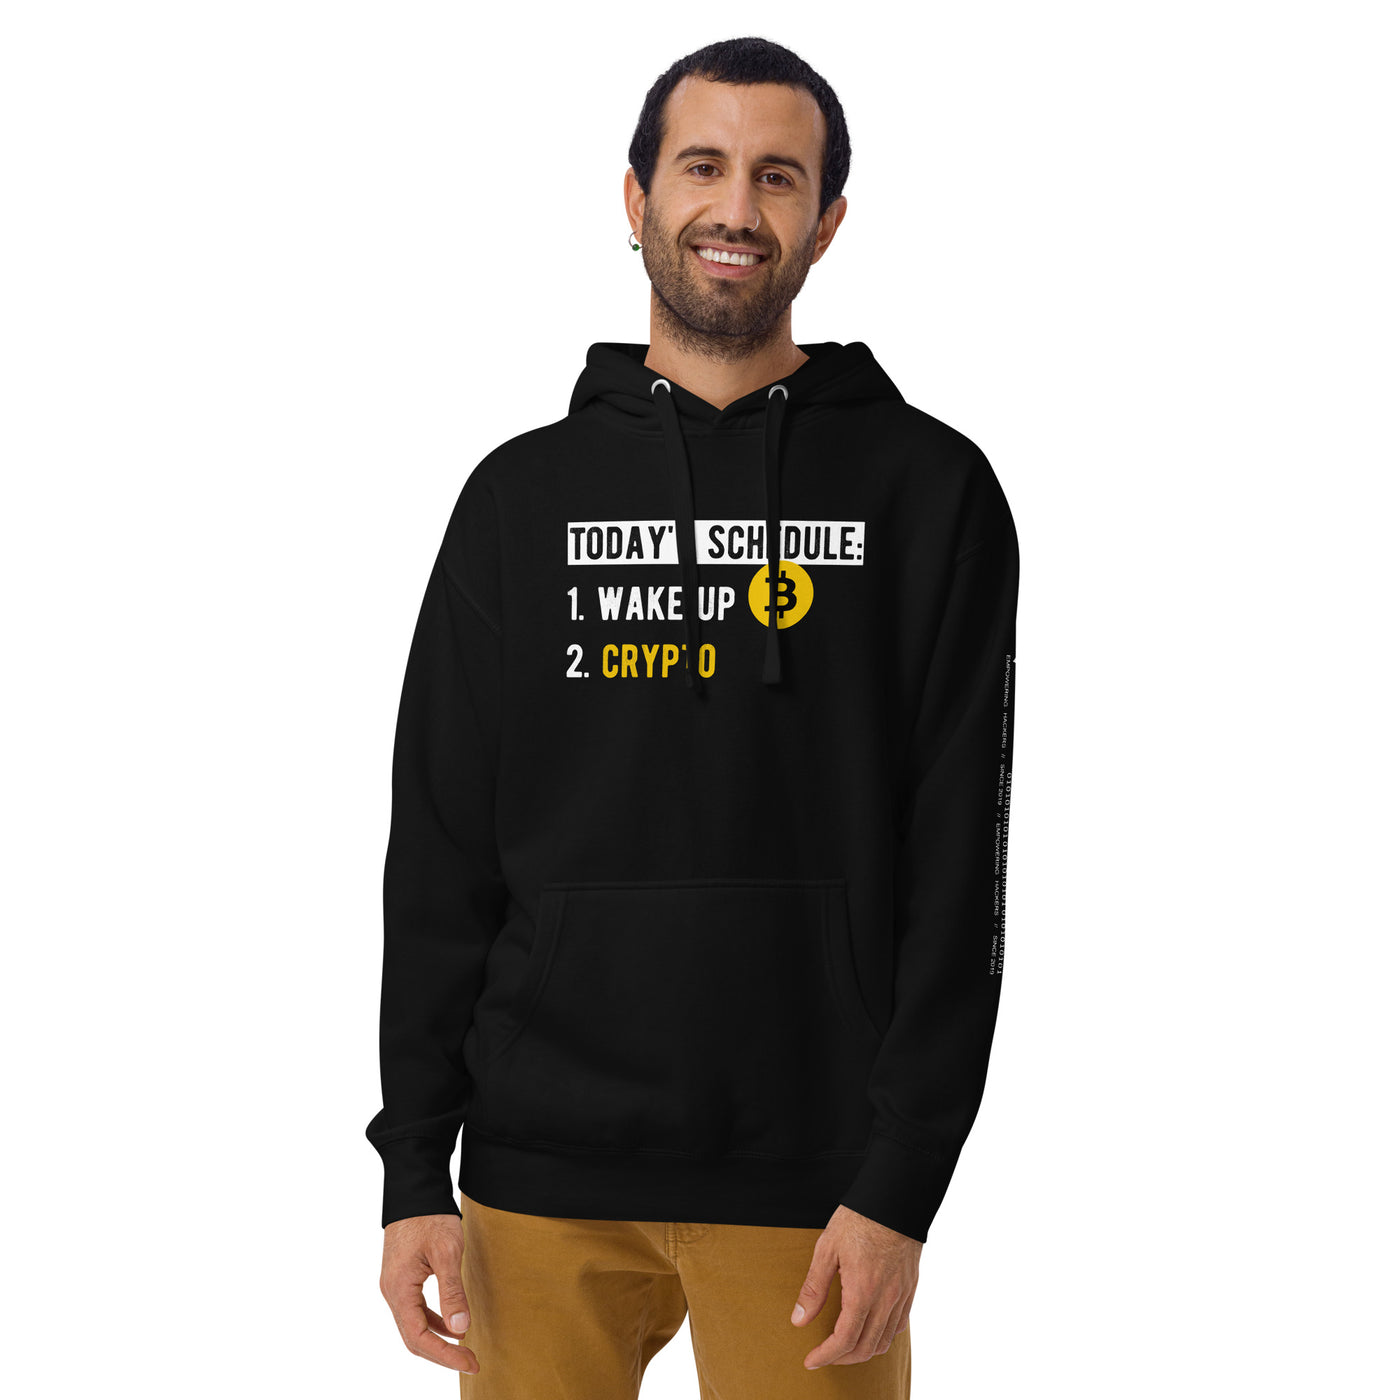 Today's Schedule - 1. Wake up 2. Crypto  Unisex Hoodie